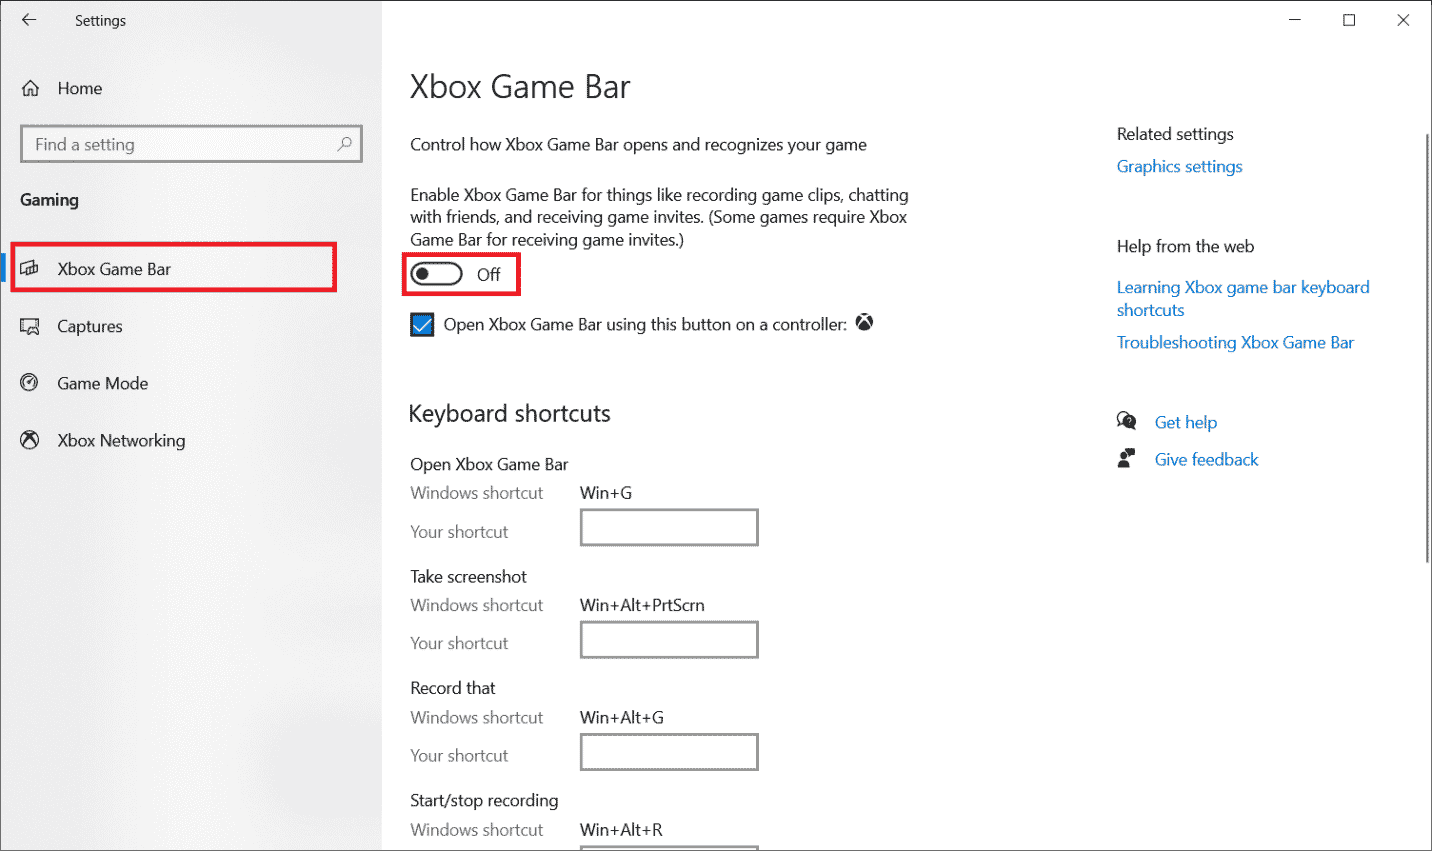 Toggle off Enable Xbox Game Bar